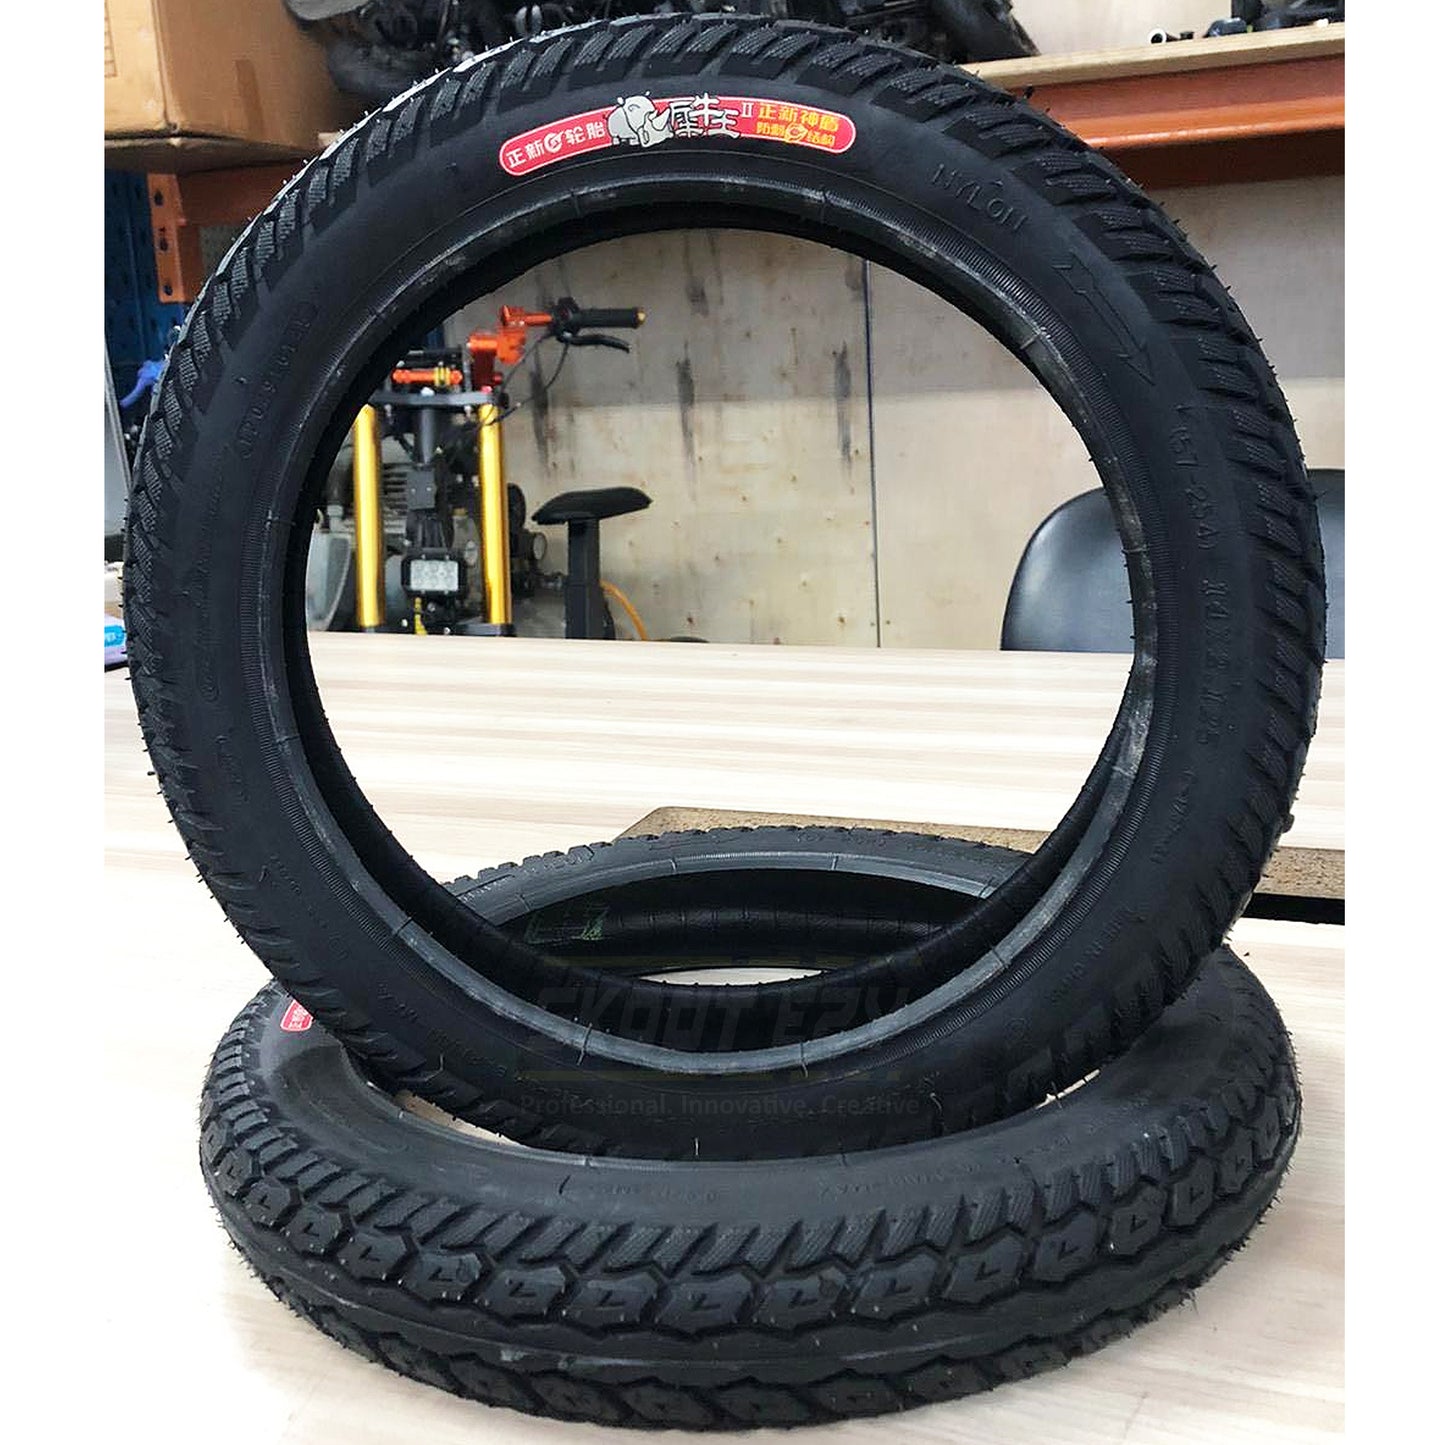 CST Rhino Tires 14 inch E-bike/Power-Assisted Bicycle (PAB)